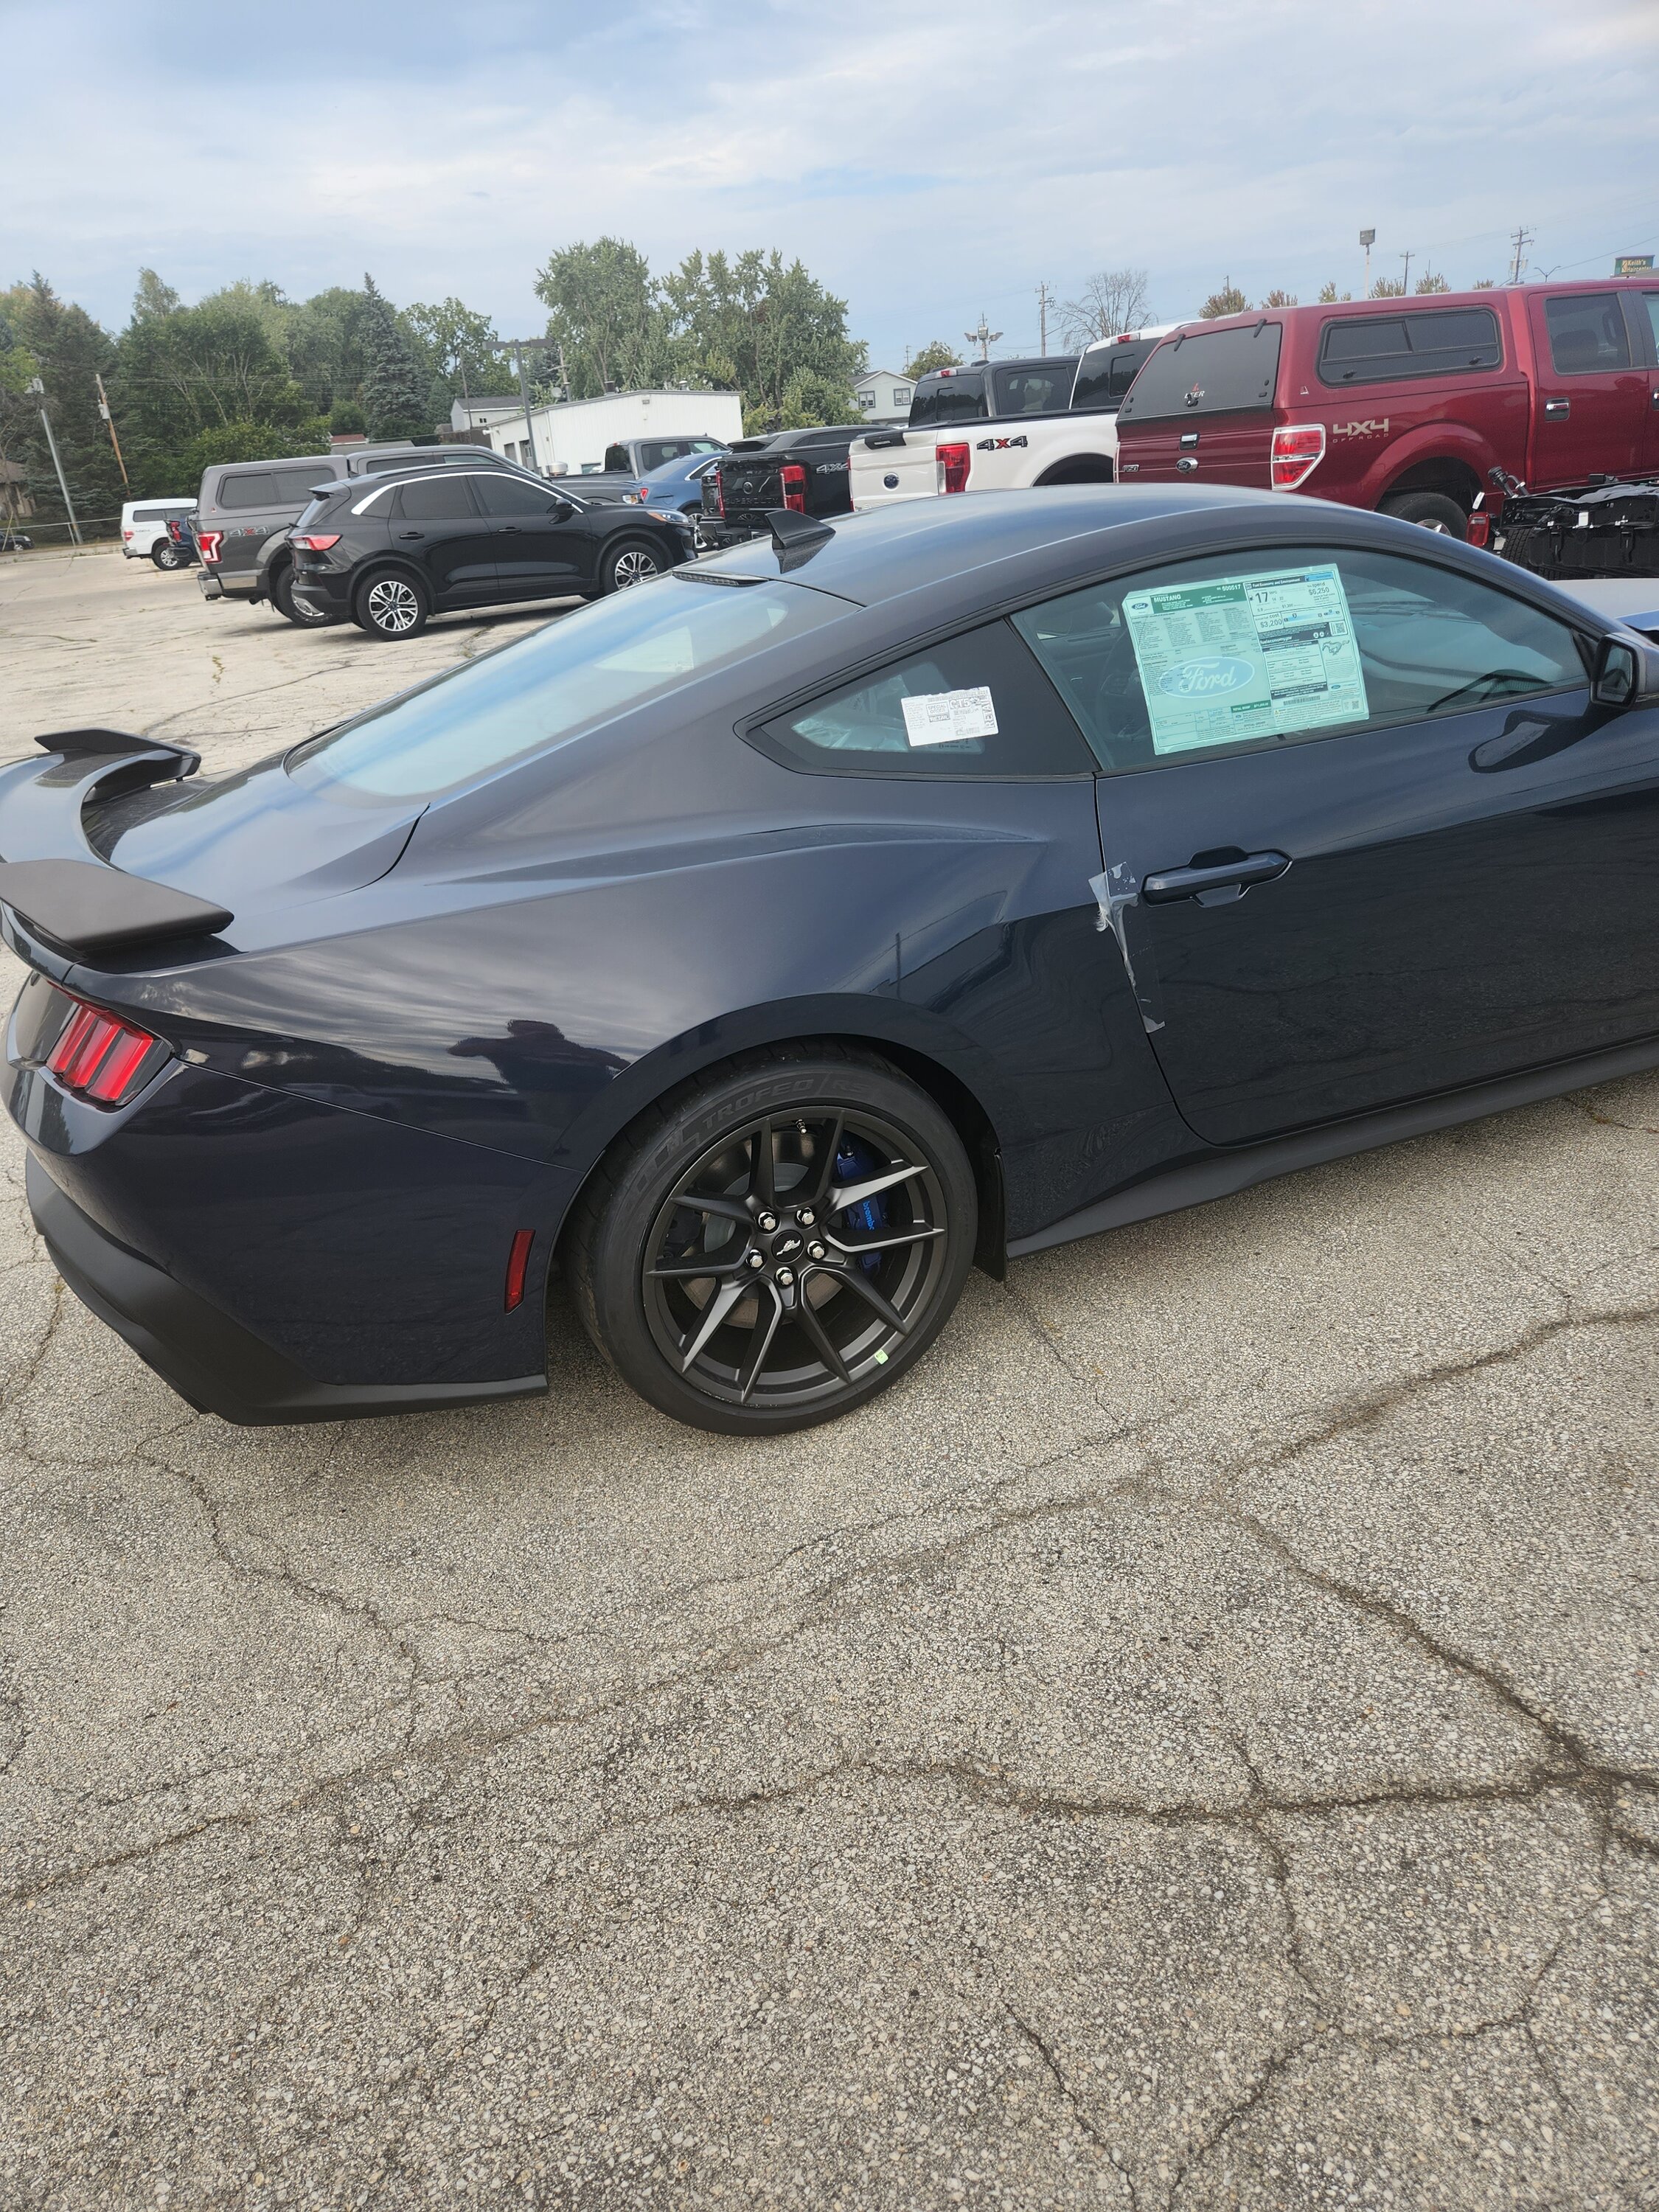 S650 Mustang Delivery Pics & Video: Pyroguy's Blue Ember Dark Horse, HP 20230905_165357